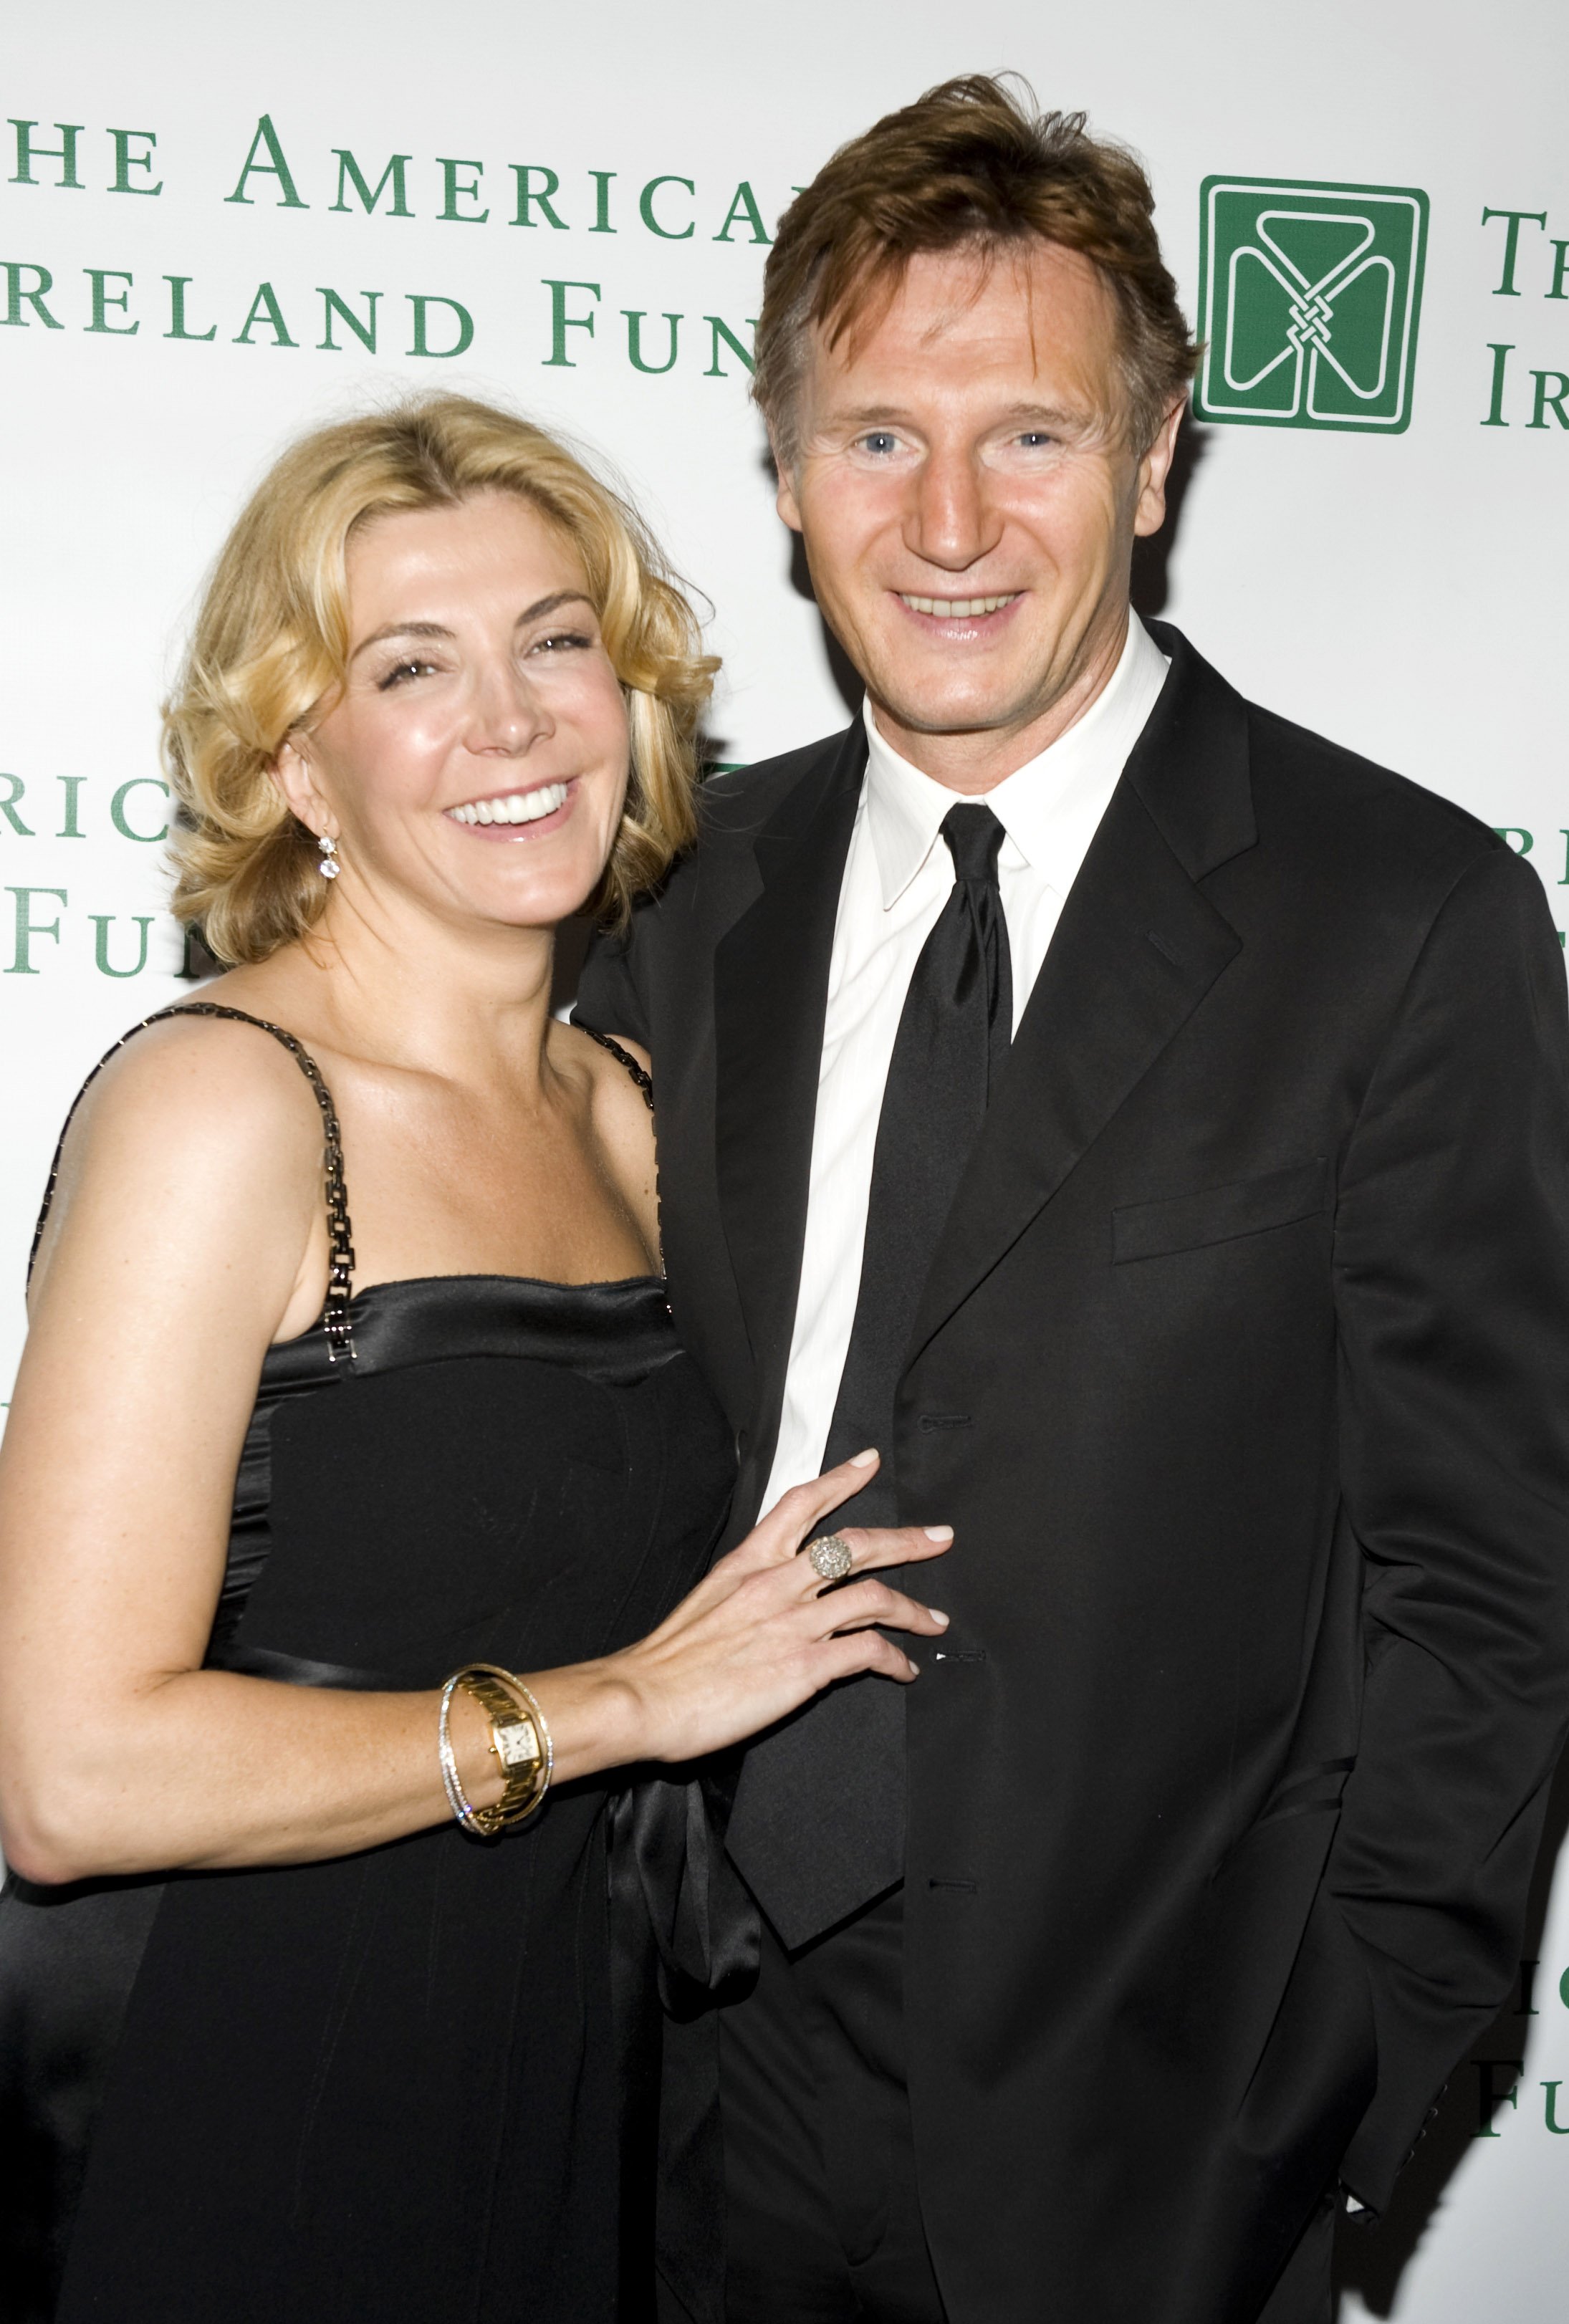 Liam Neeson and Natasha Richardson during the 33rd Annual American Ireland Fund Gala at The Tent at Lincoln Center on May 08, 2008 in New York City. / Source: Getty Images